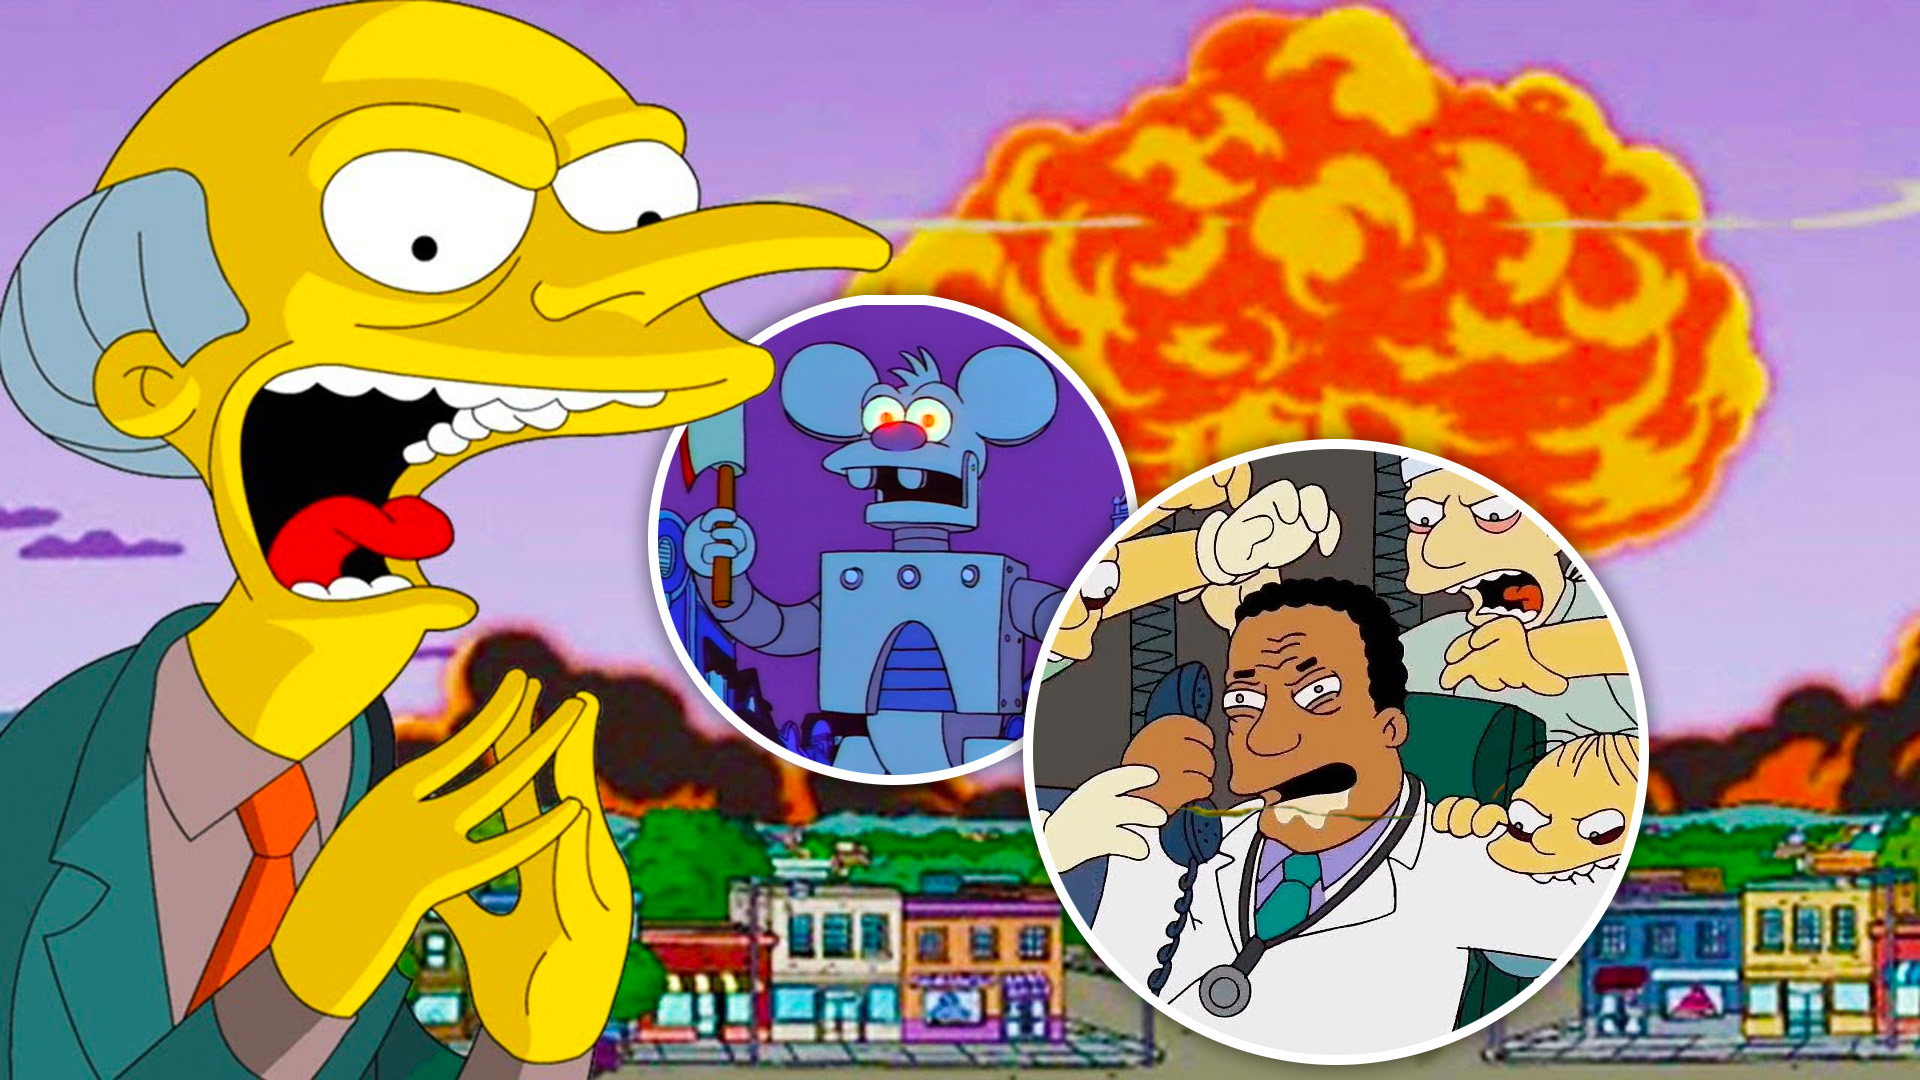 The Simpsons Predicted AI Taking Over, Zombies and World War 3 in 2024